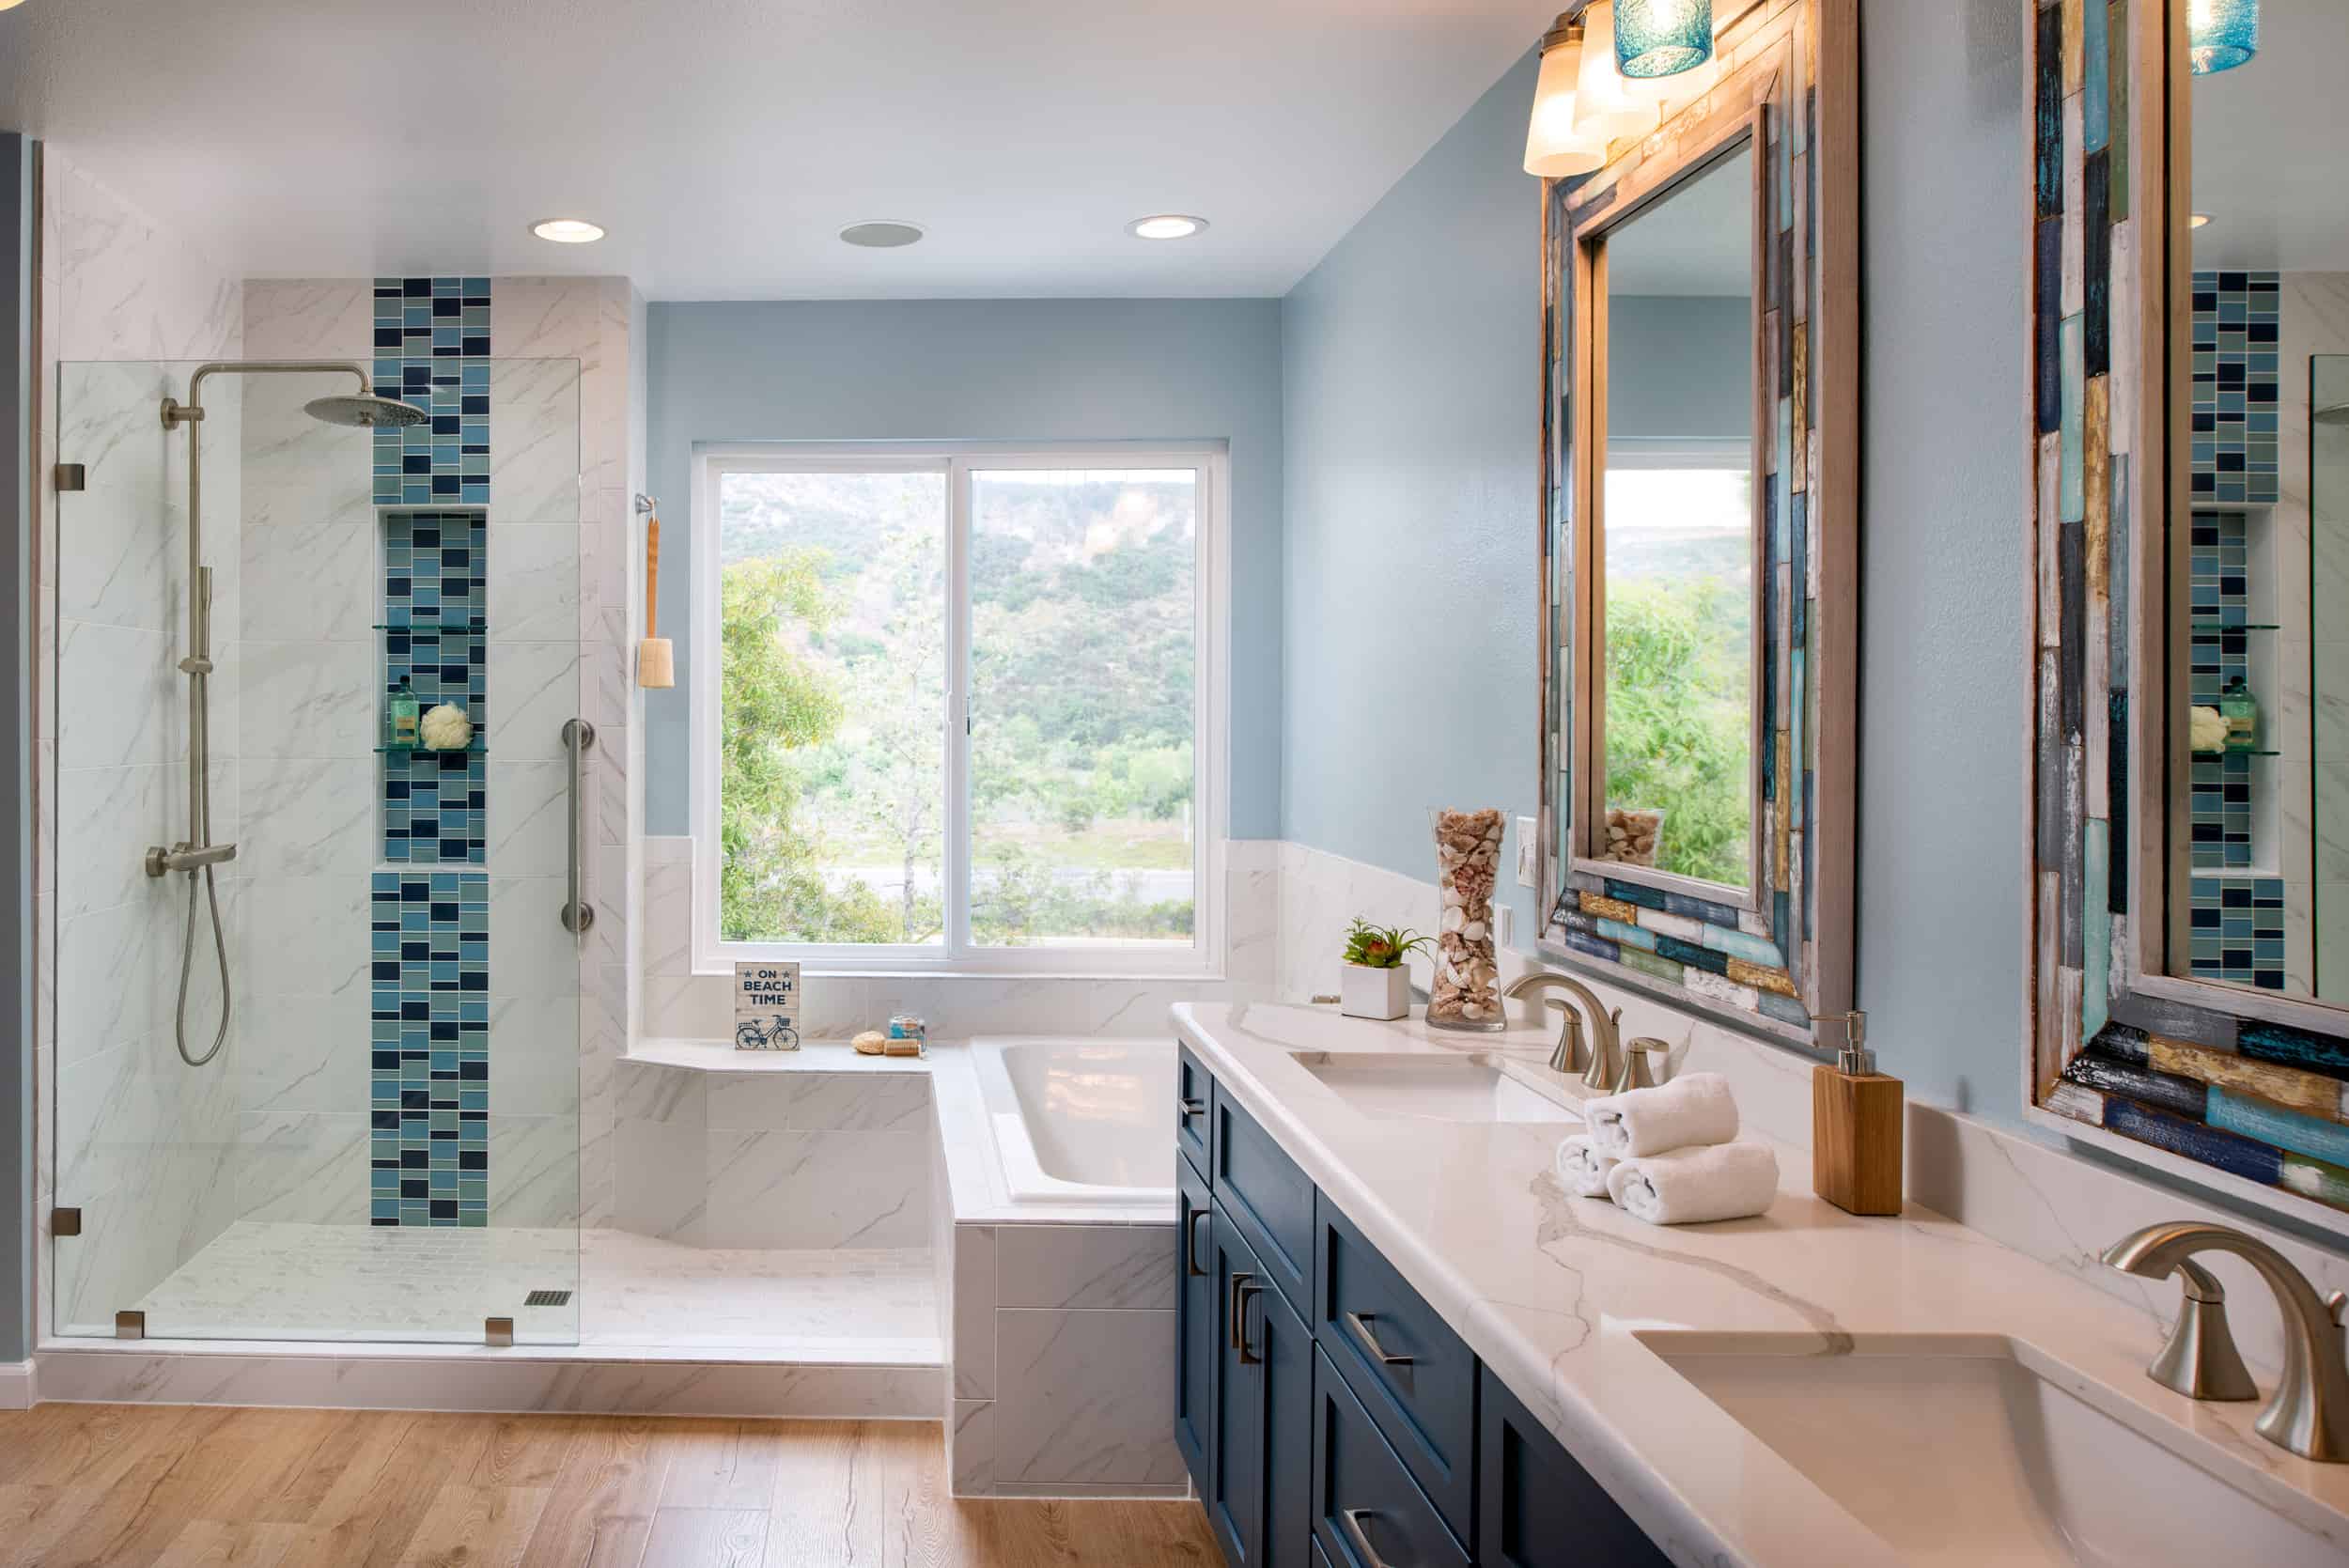 Cost Of Adding A Bathroom Remodel Works, How Much To Add A Bathroom House